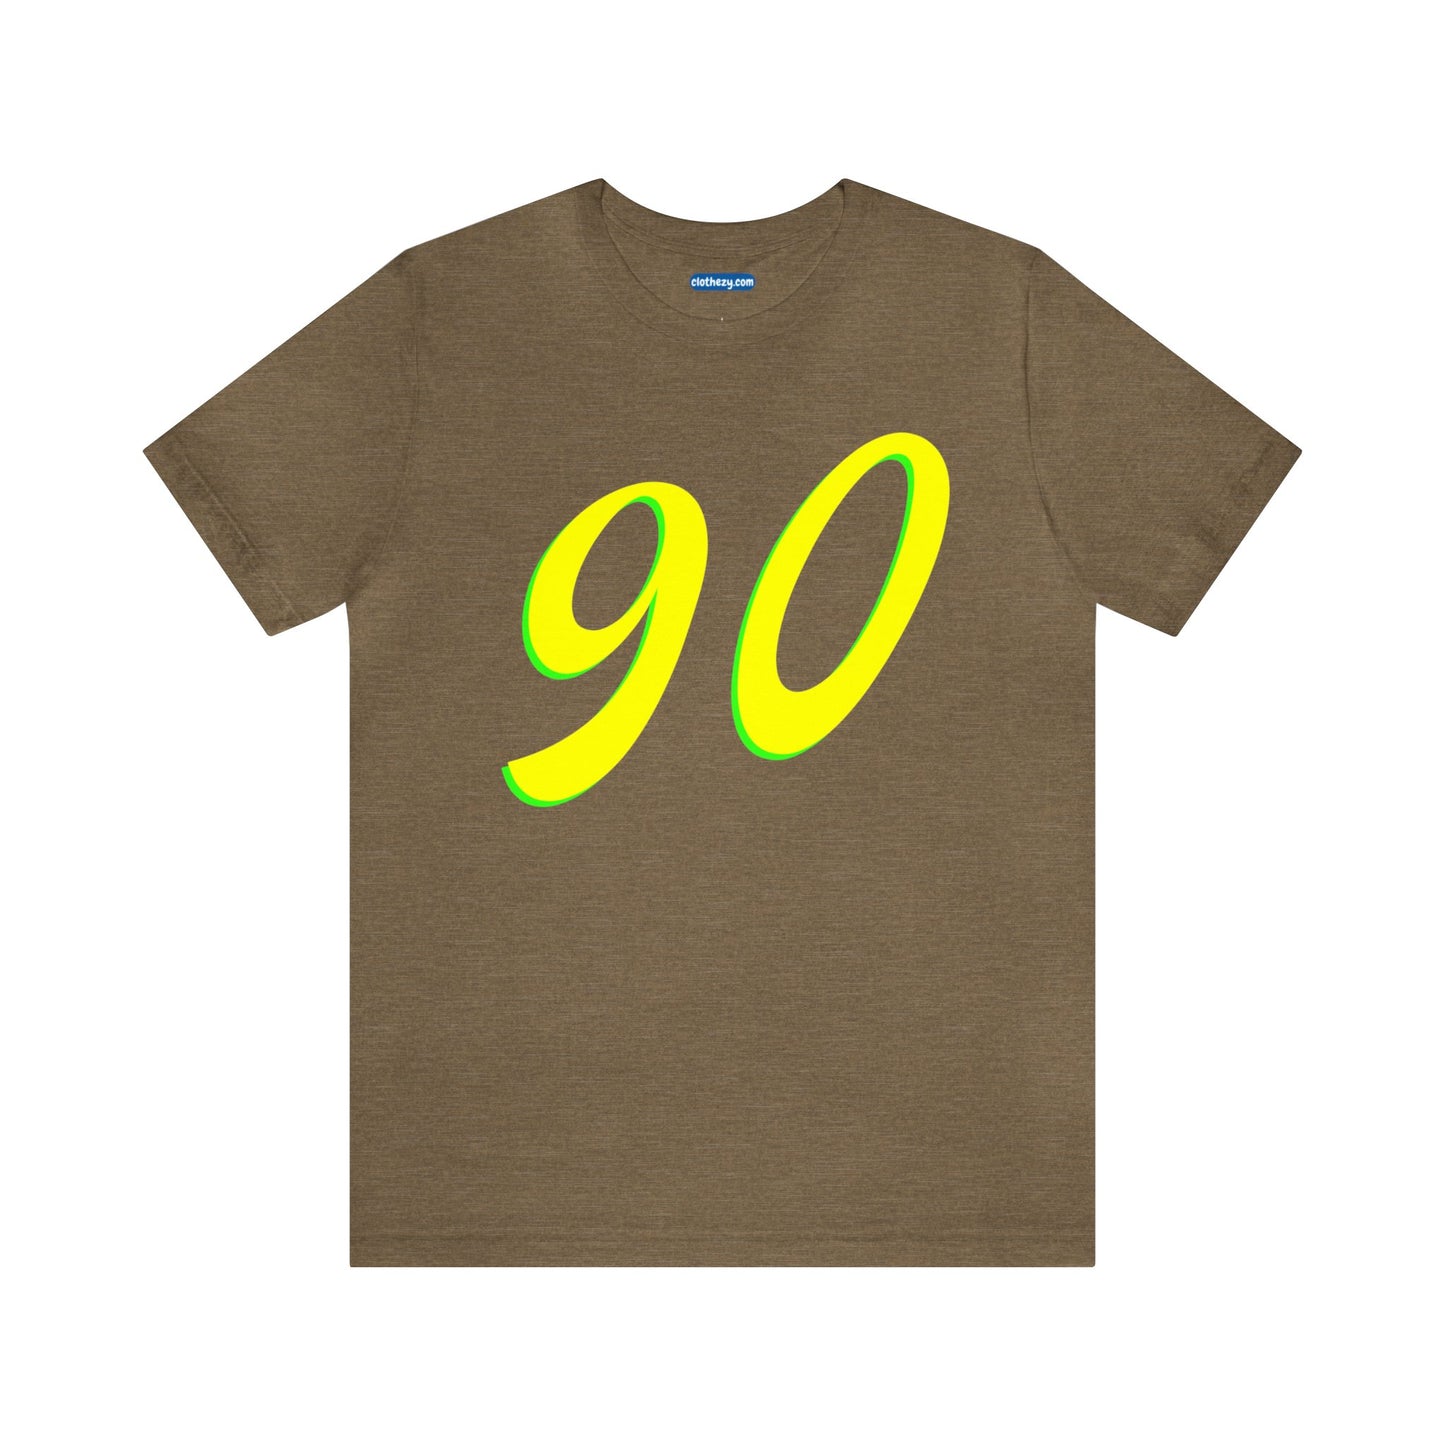 Number 90 Design - Soft Cotton Tee for birthdays and celebrations, Gift for friends and family, Multiple Options by clothezy.com in Olive Heather Size Small - Buy Now